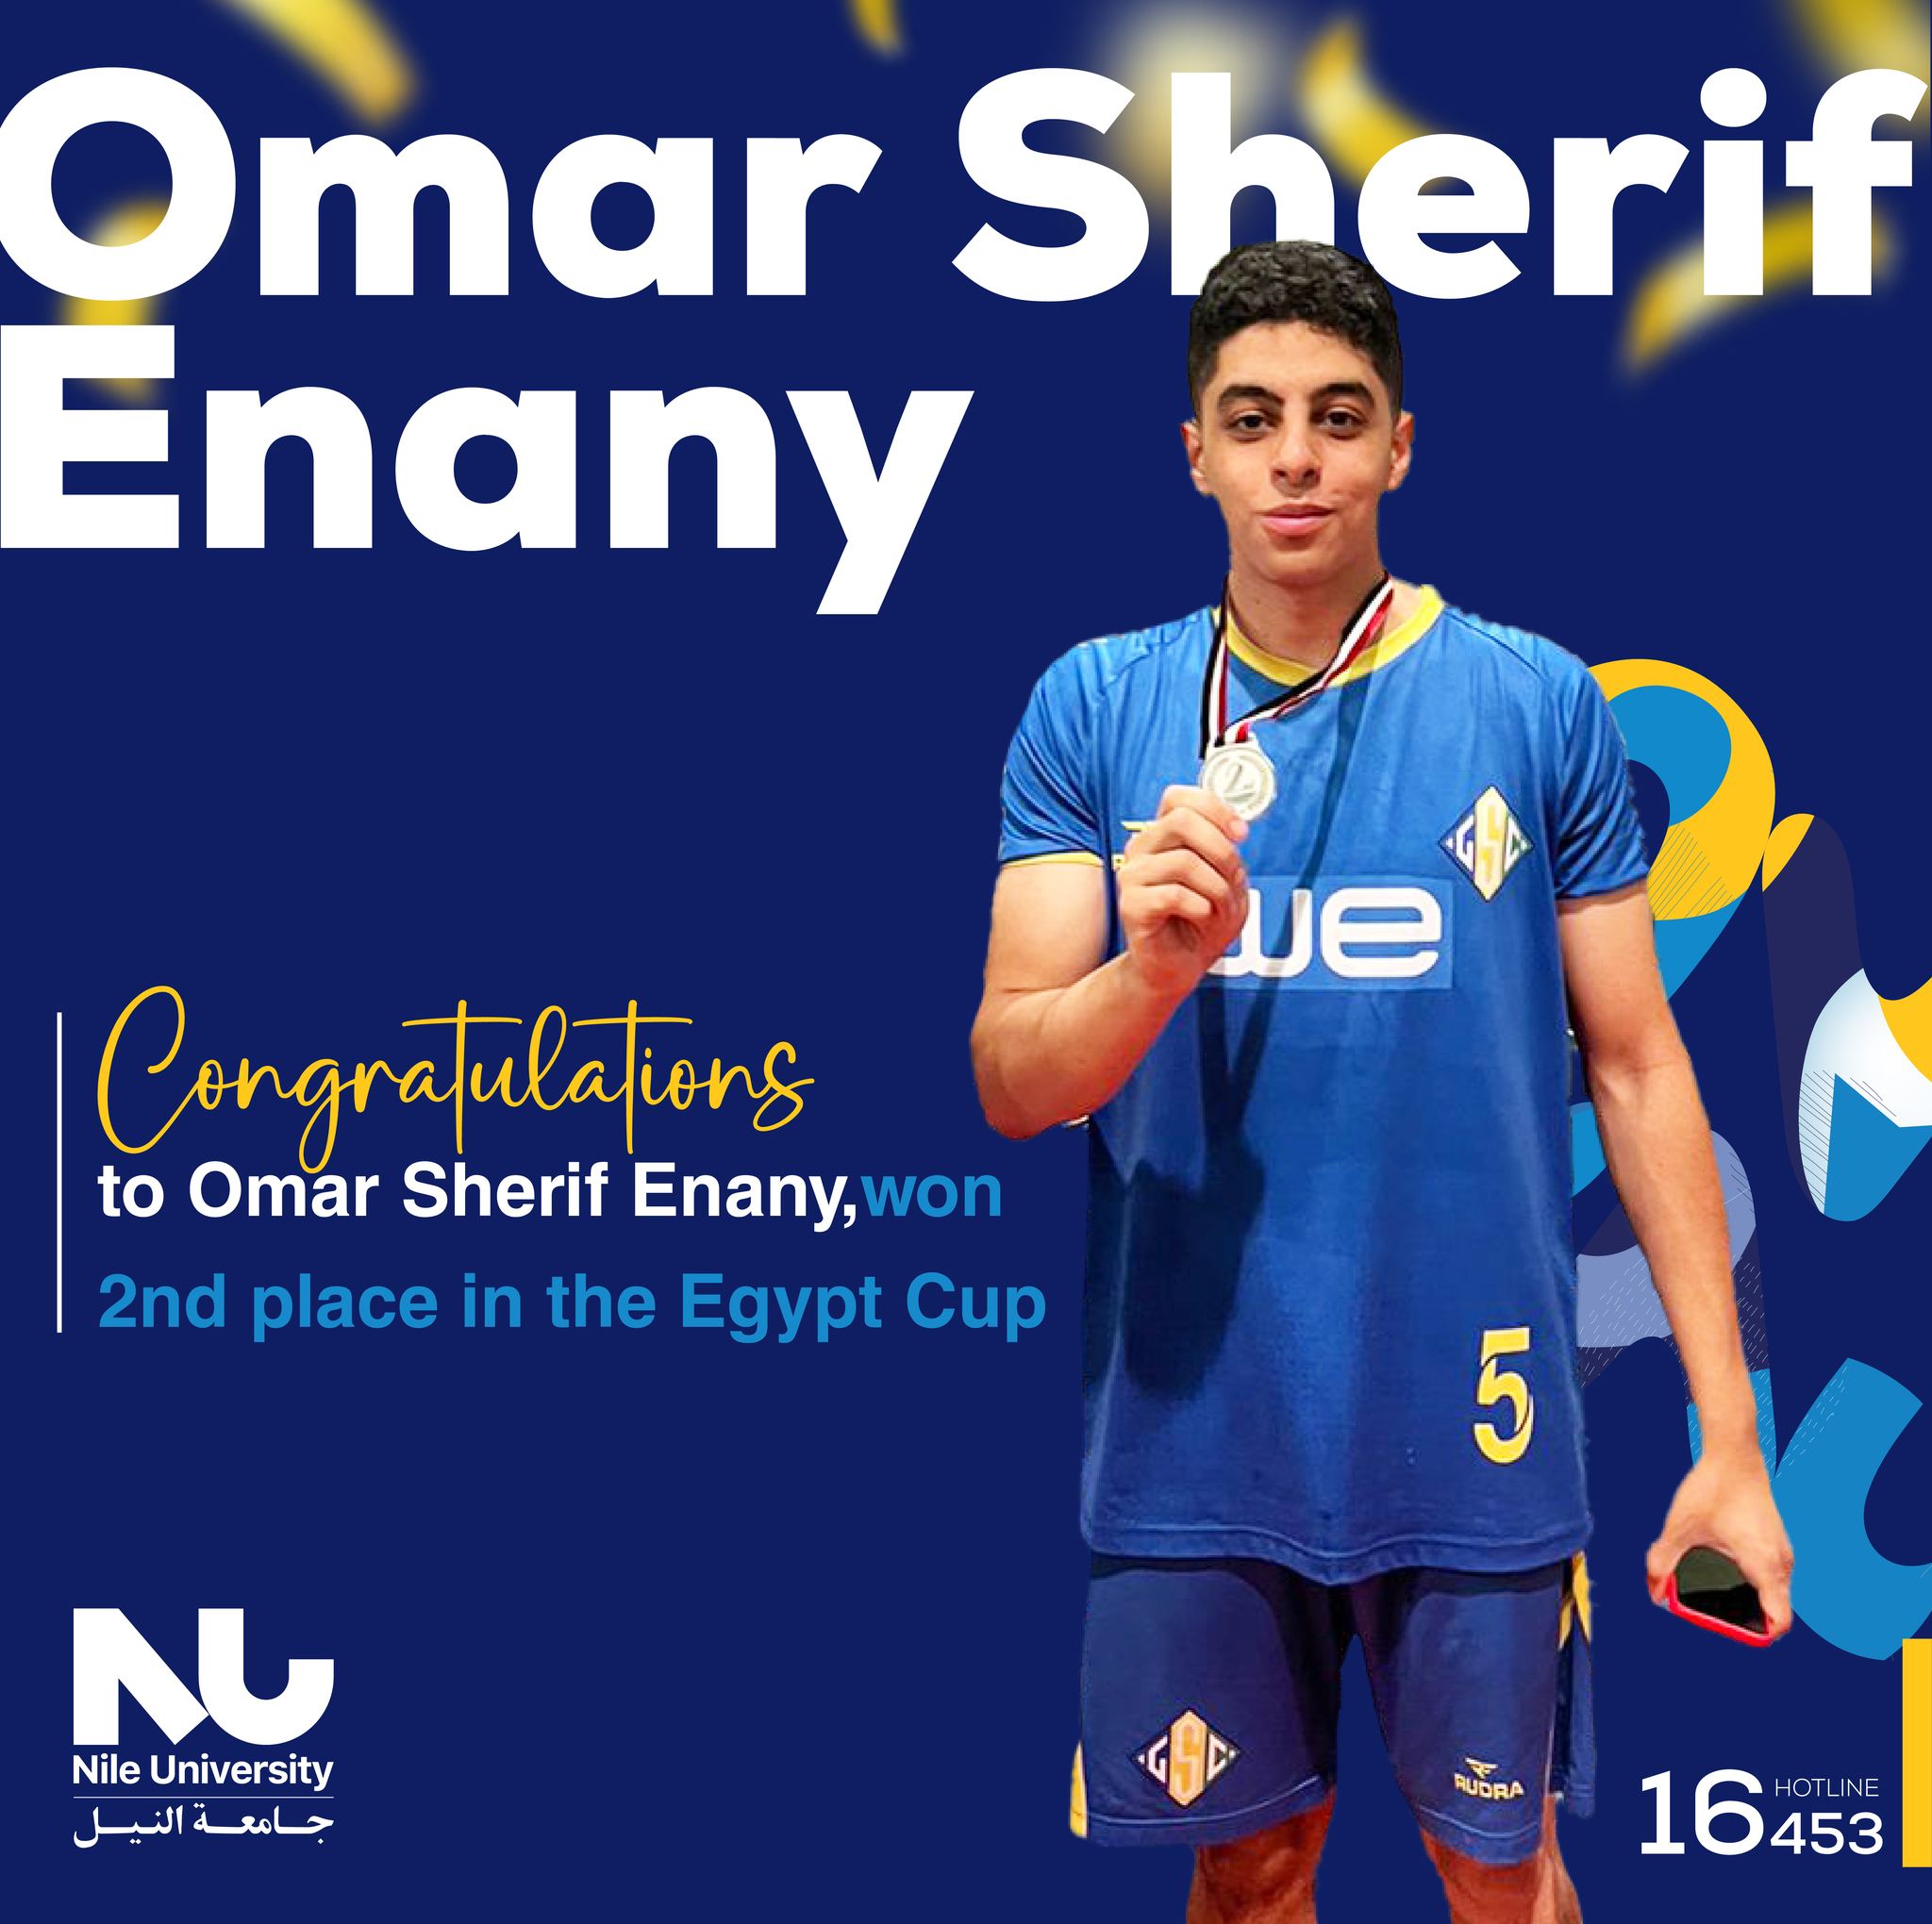 Omar Sherif Enany’s Outstanding Achievement in the Egyptian Cup Tournament